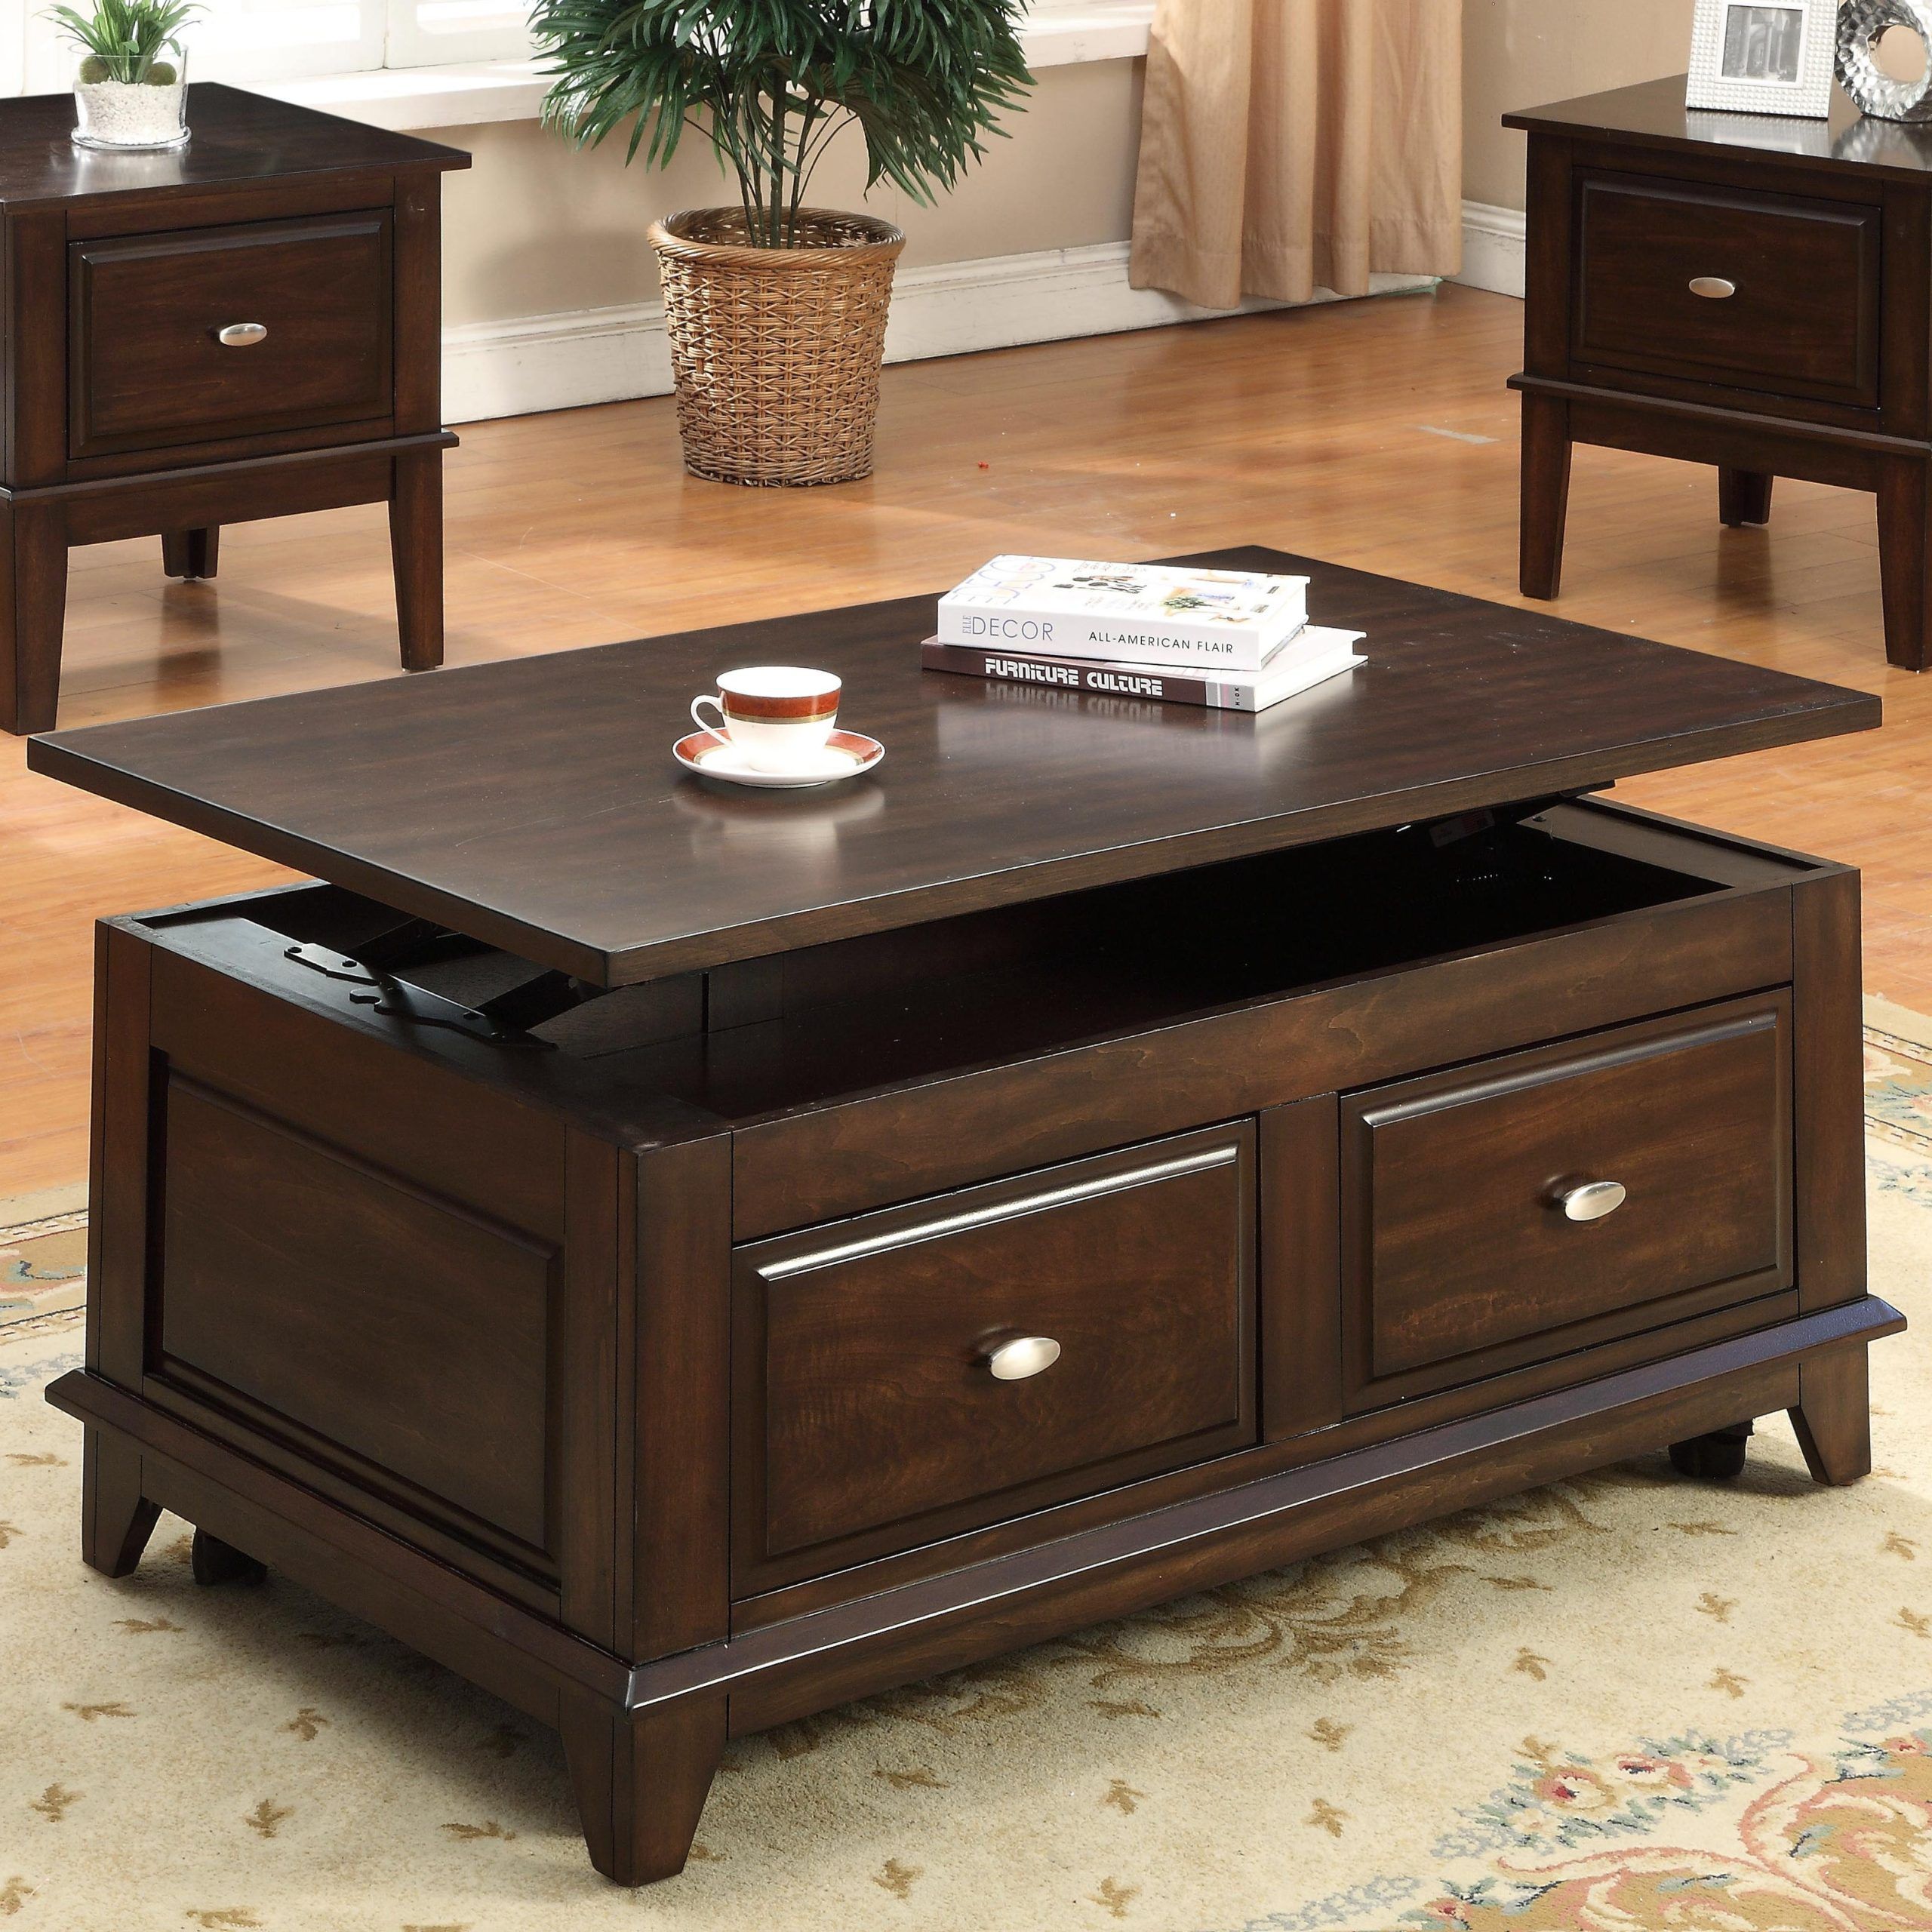 Lift Top Coffee Table Ff0 Throughout High Gloss Lift Top Coffee Tables (View 21 of 21)